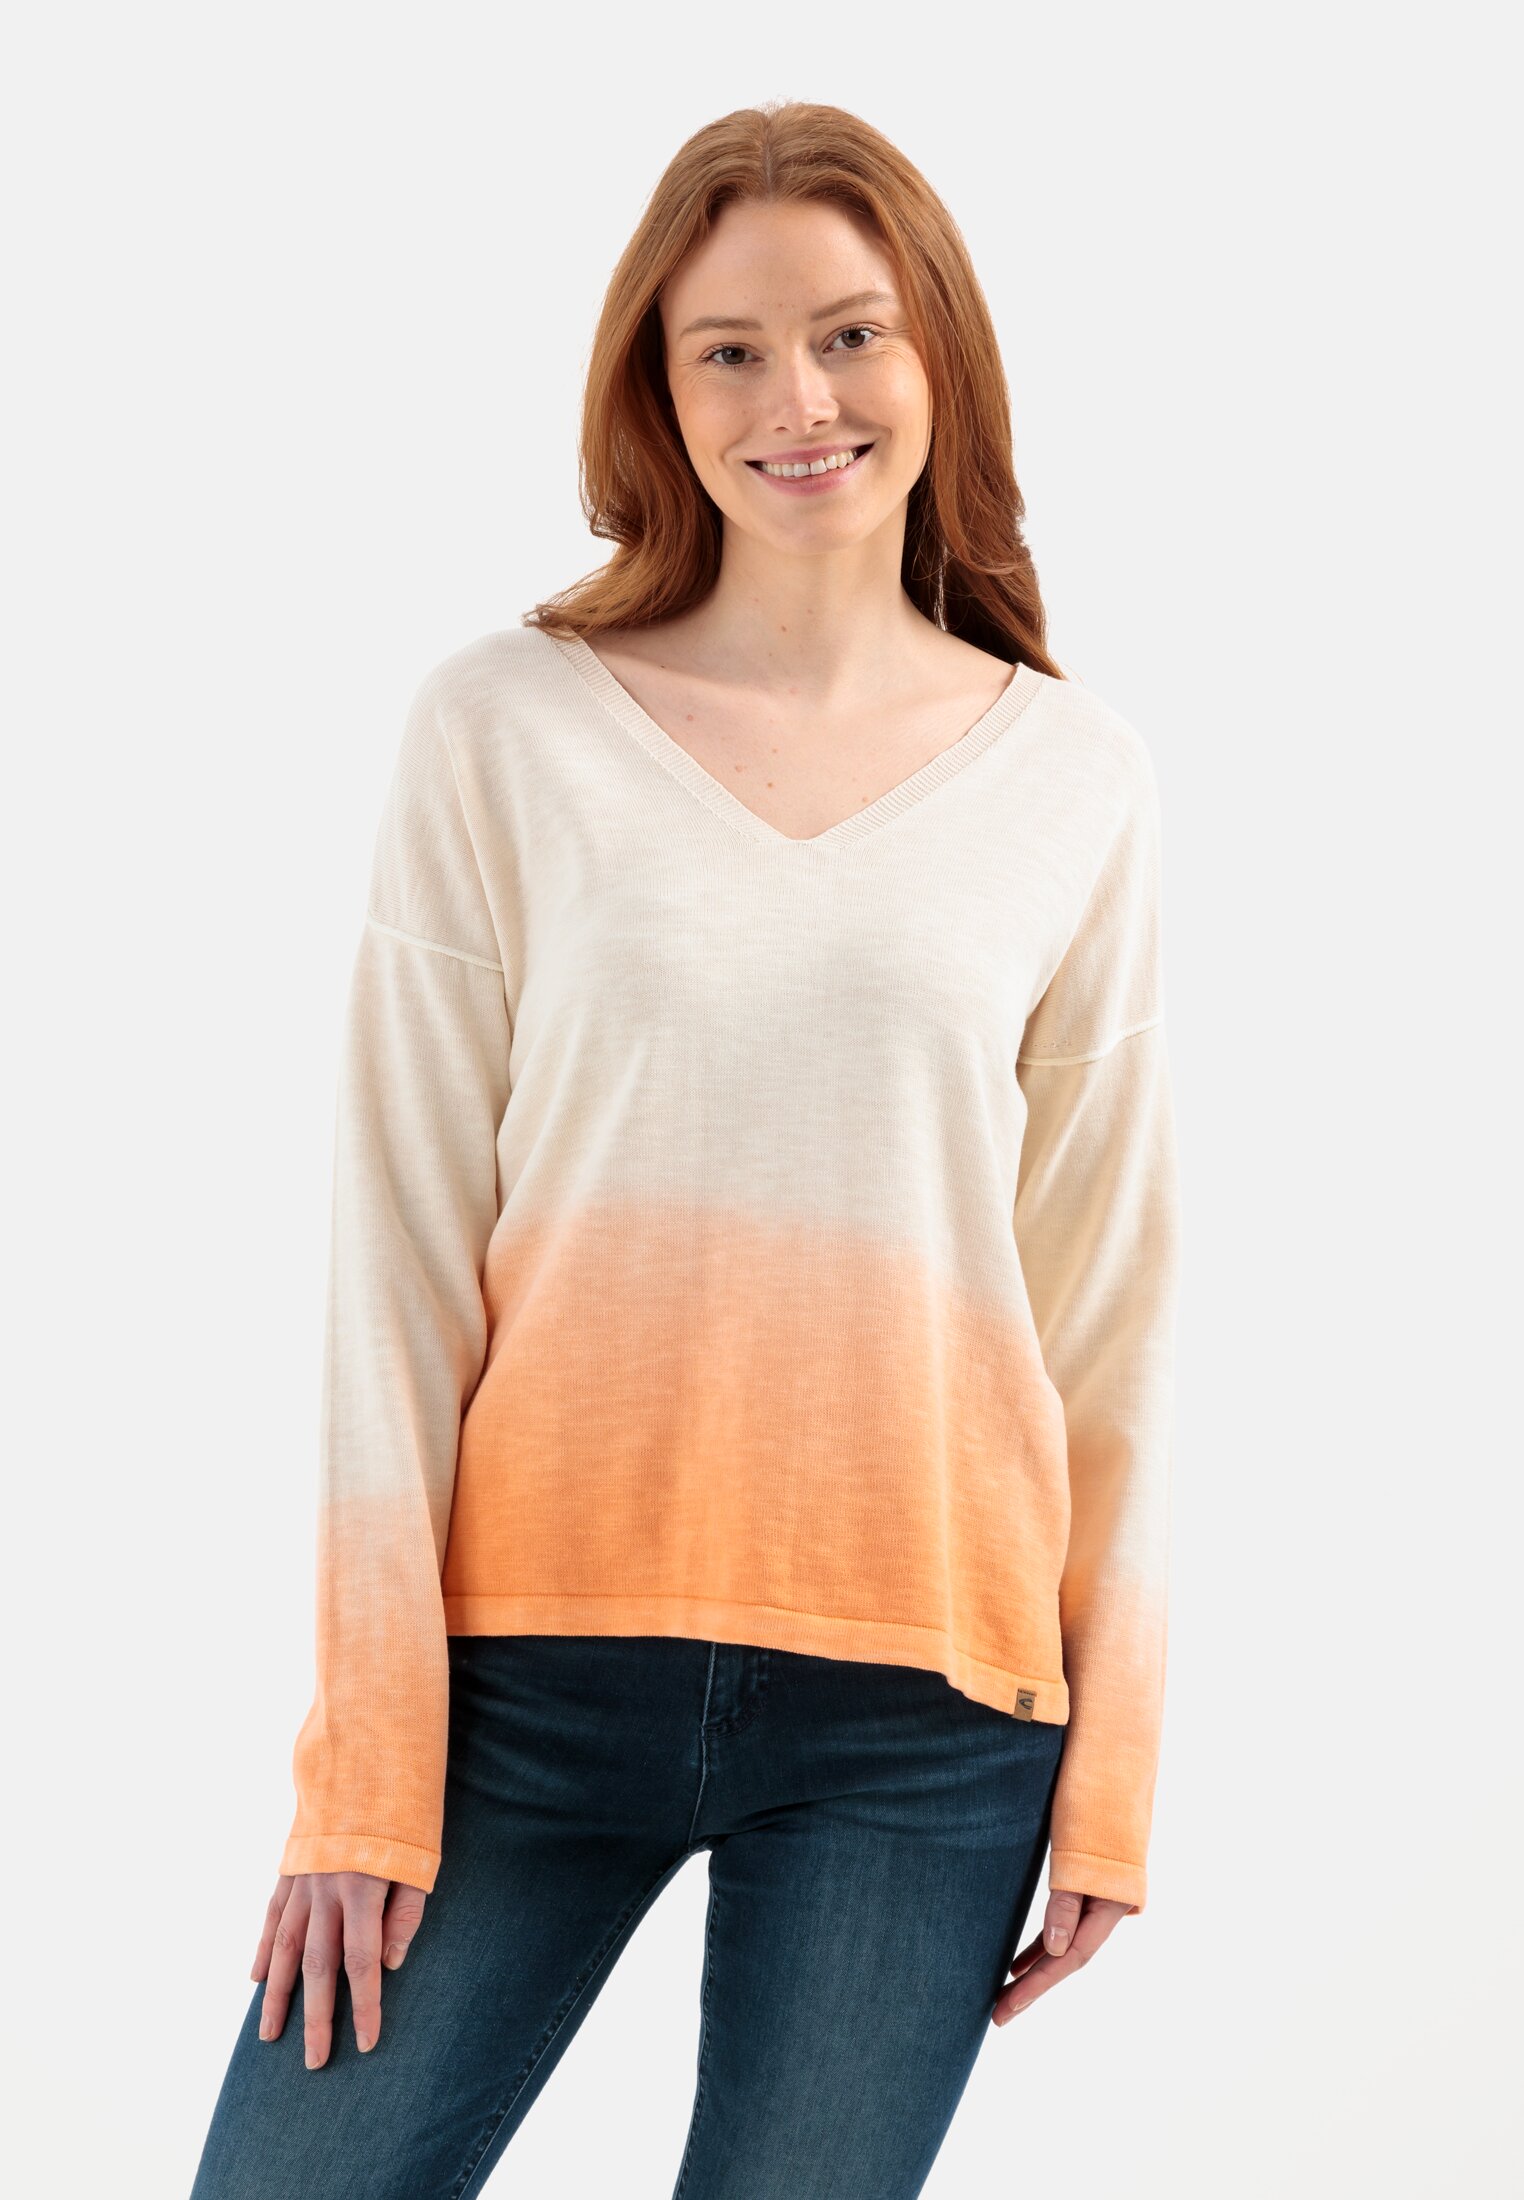 Camel Active Knit Sweater with dip dye effect